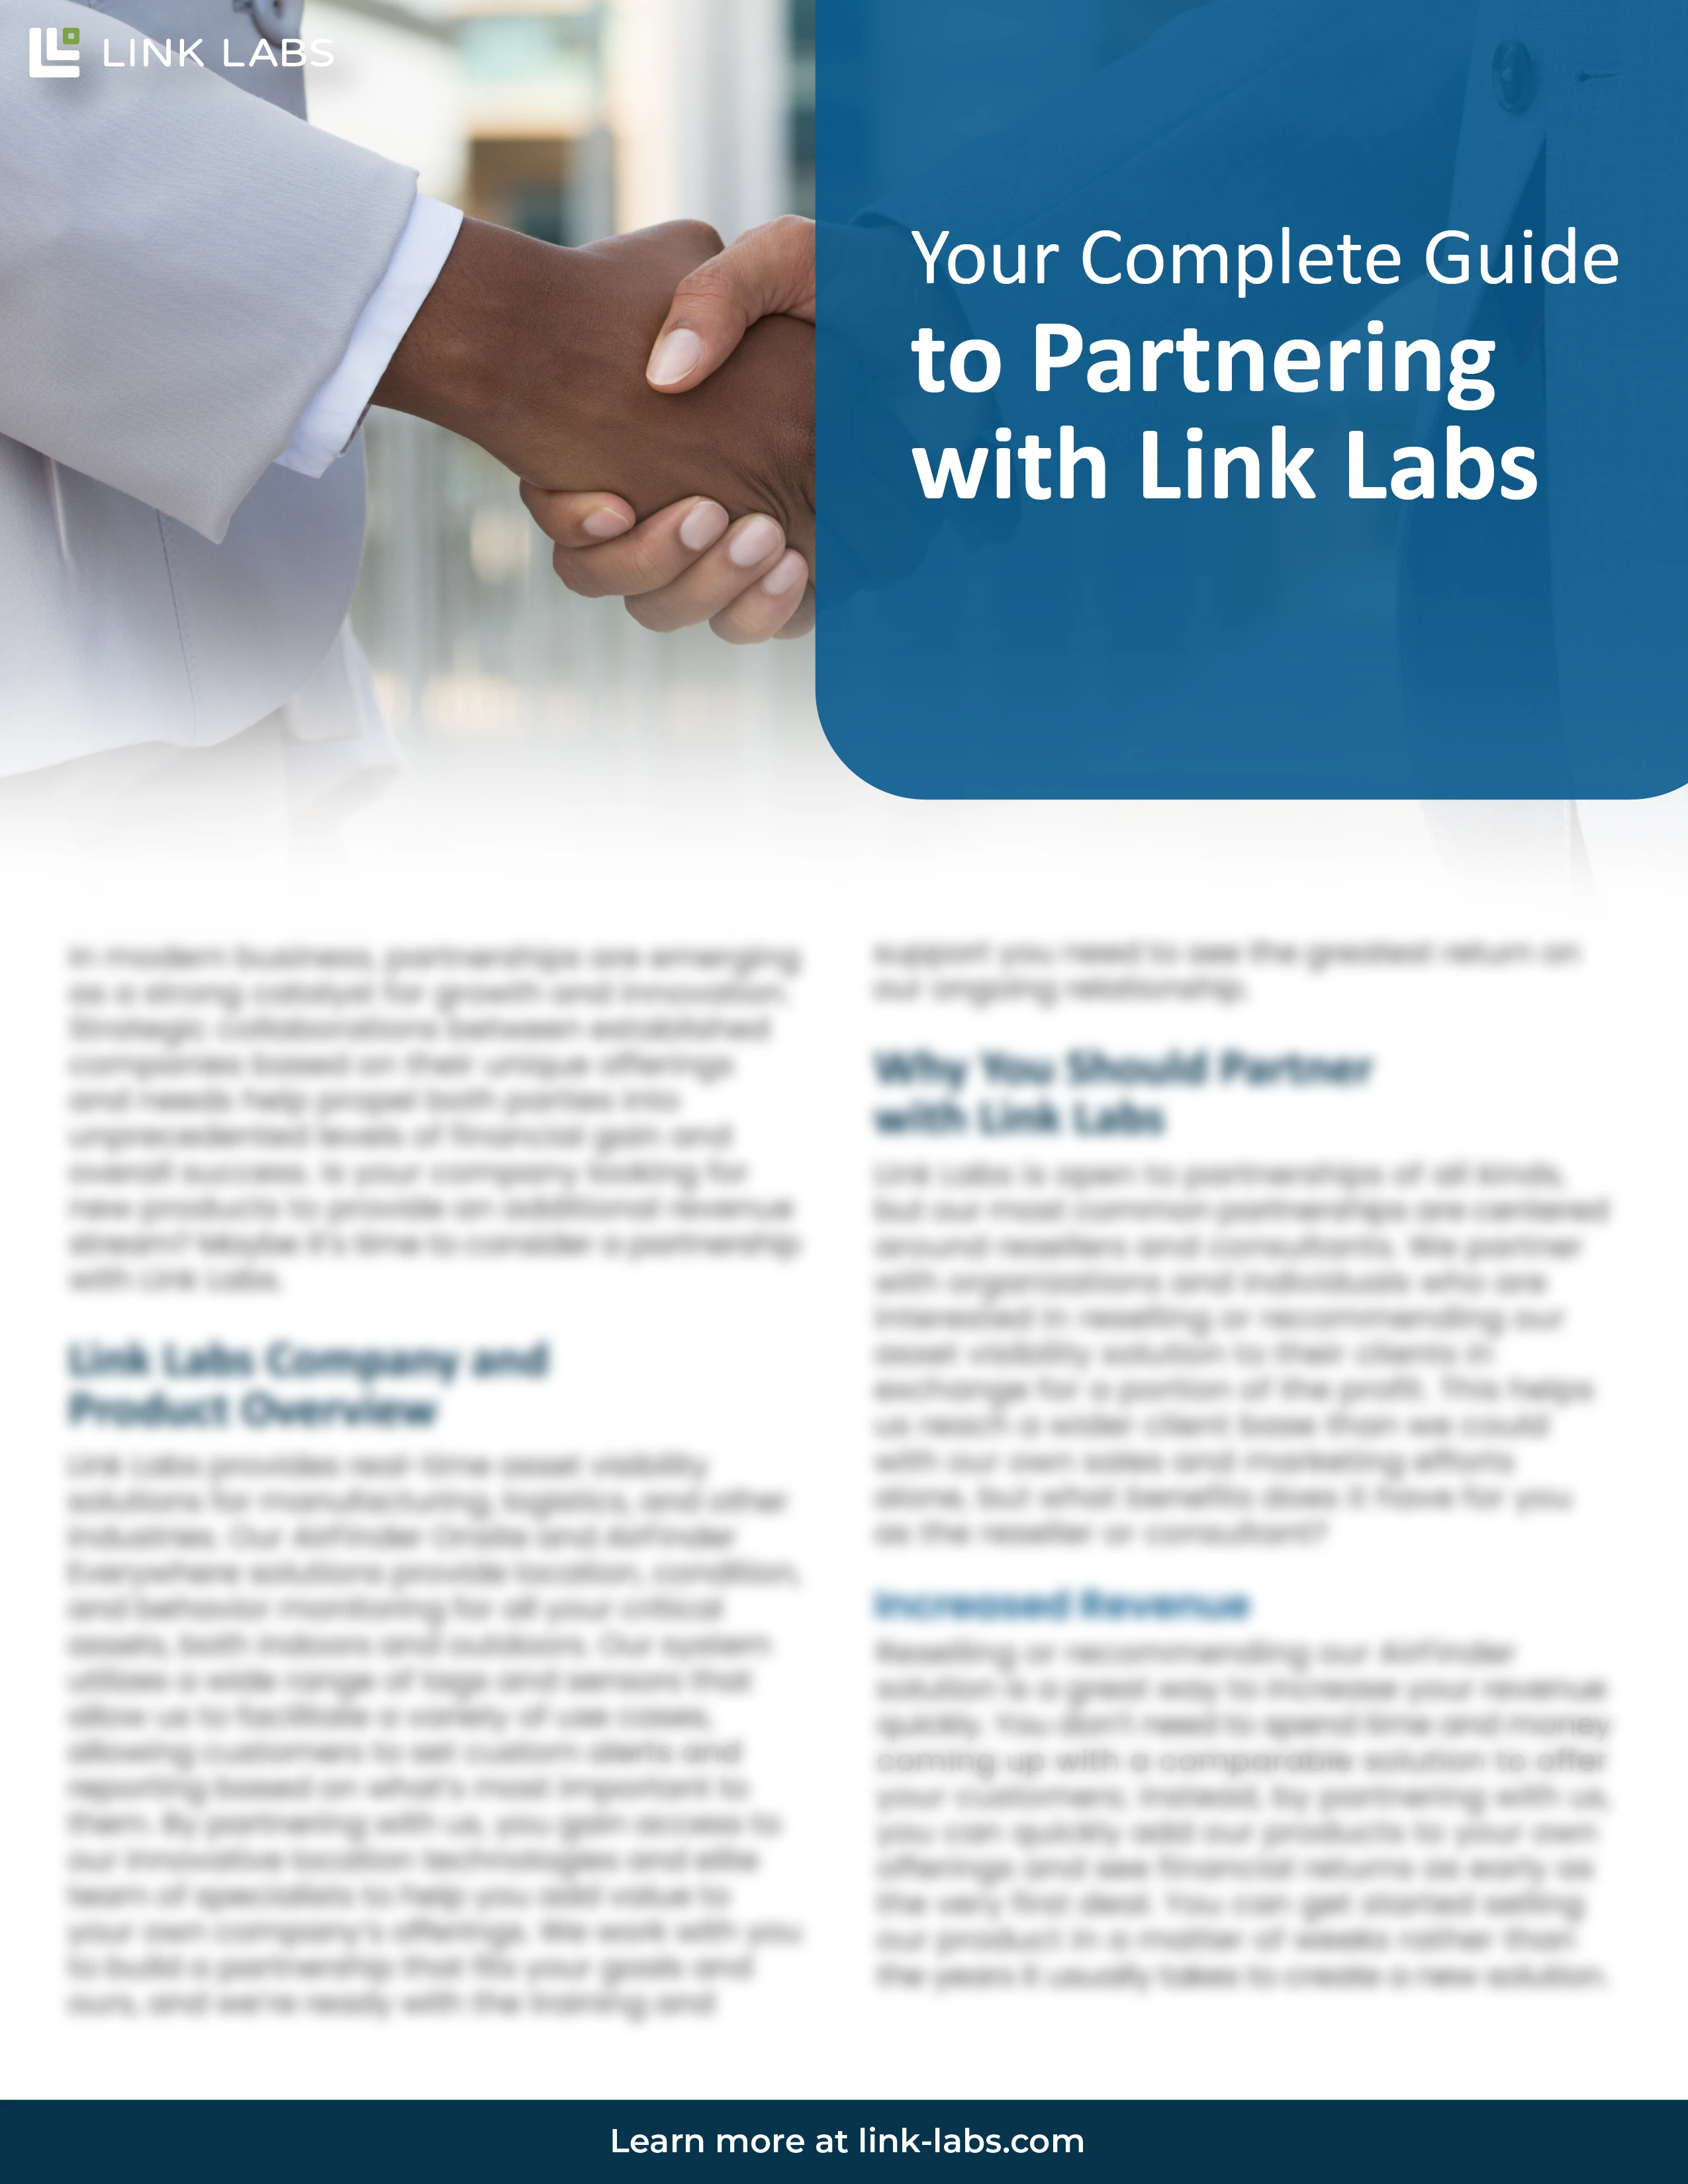 Your Complete Guide to Partnering with Link Labs